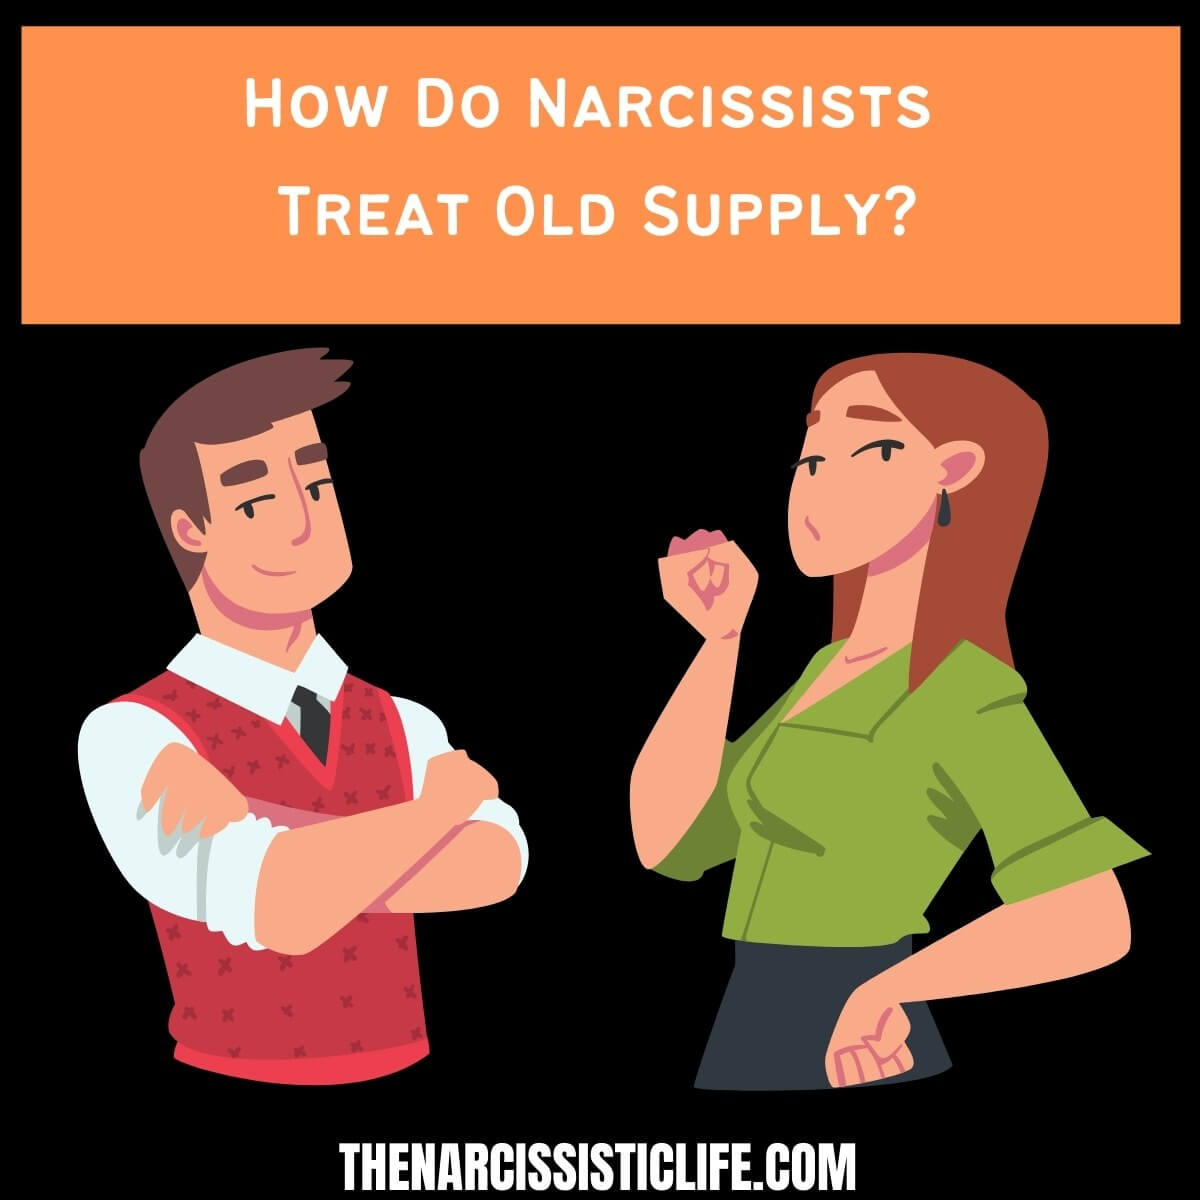 How Do Narcissists Treat Old Supply?